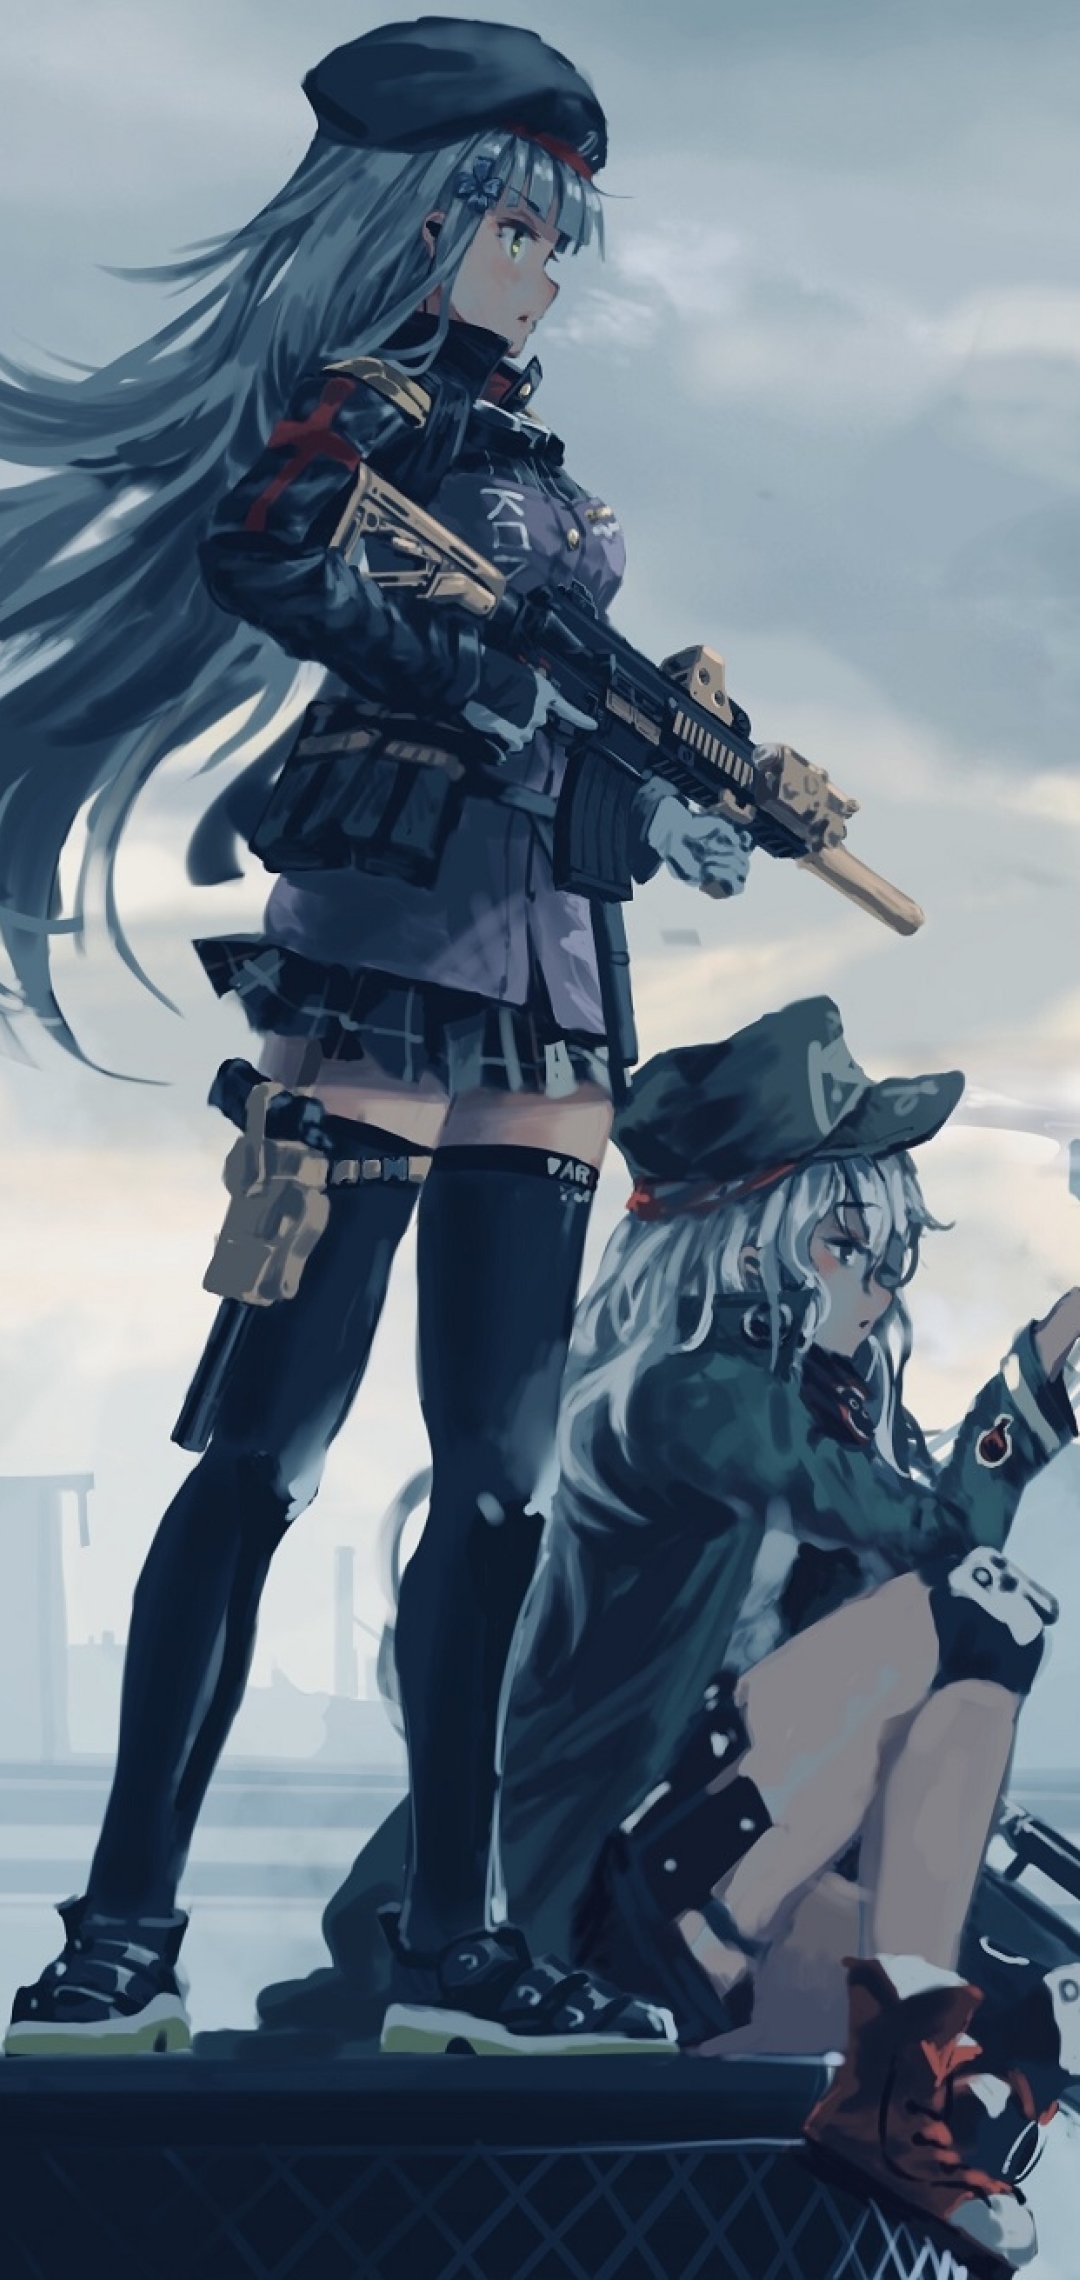 G11 And Hk416 Girls Frontline One Plus Huawei P20